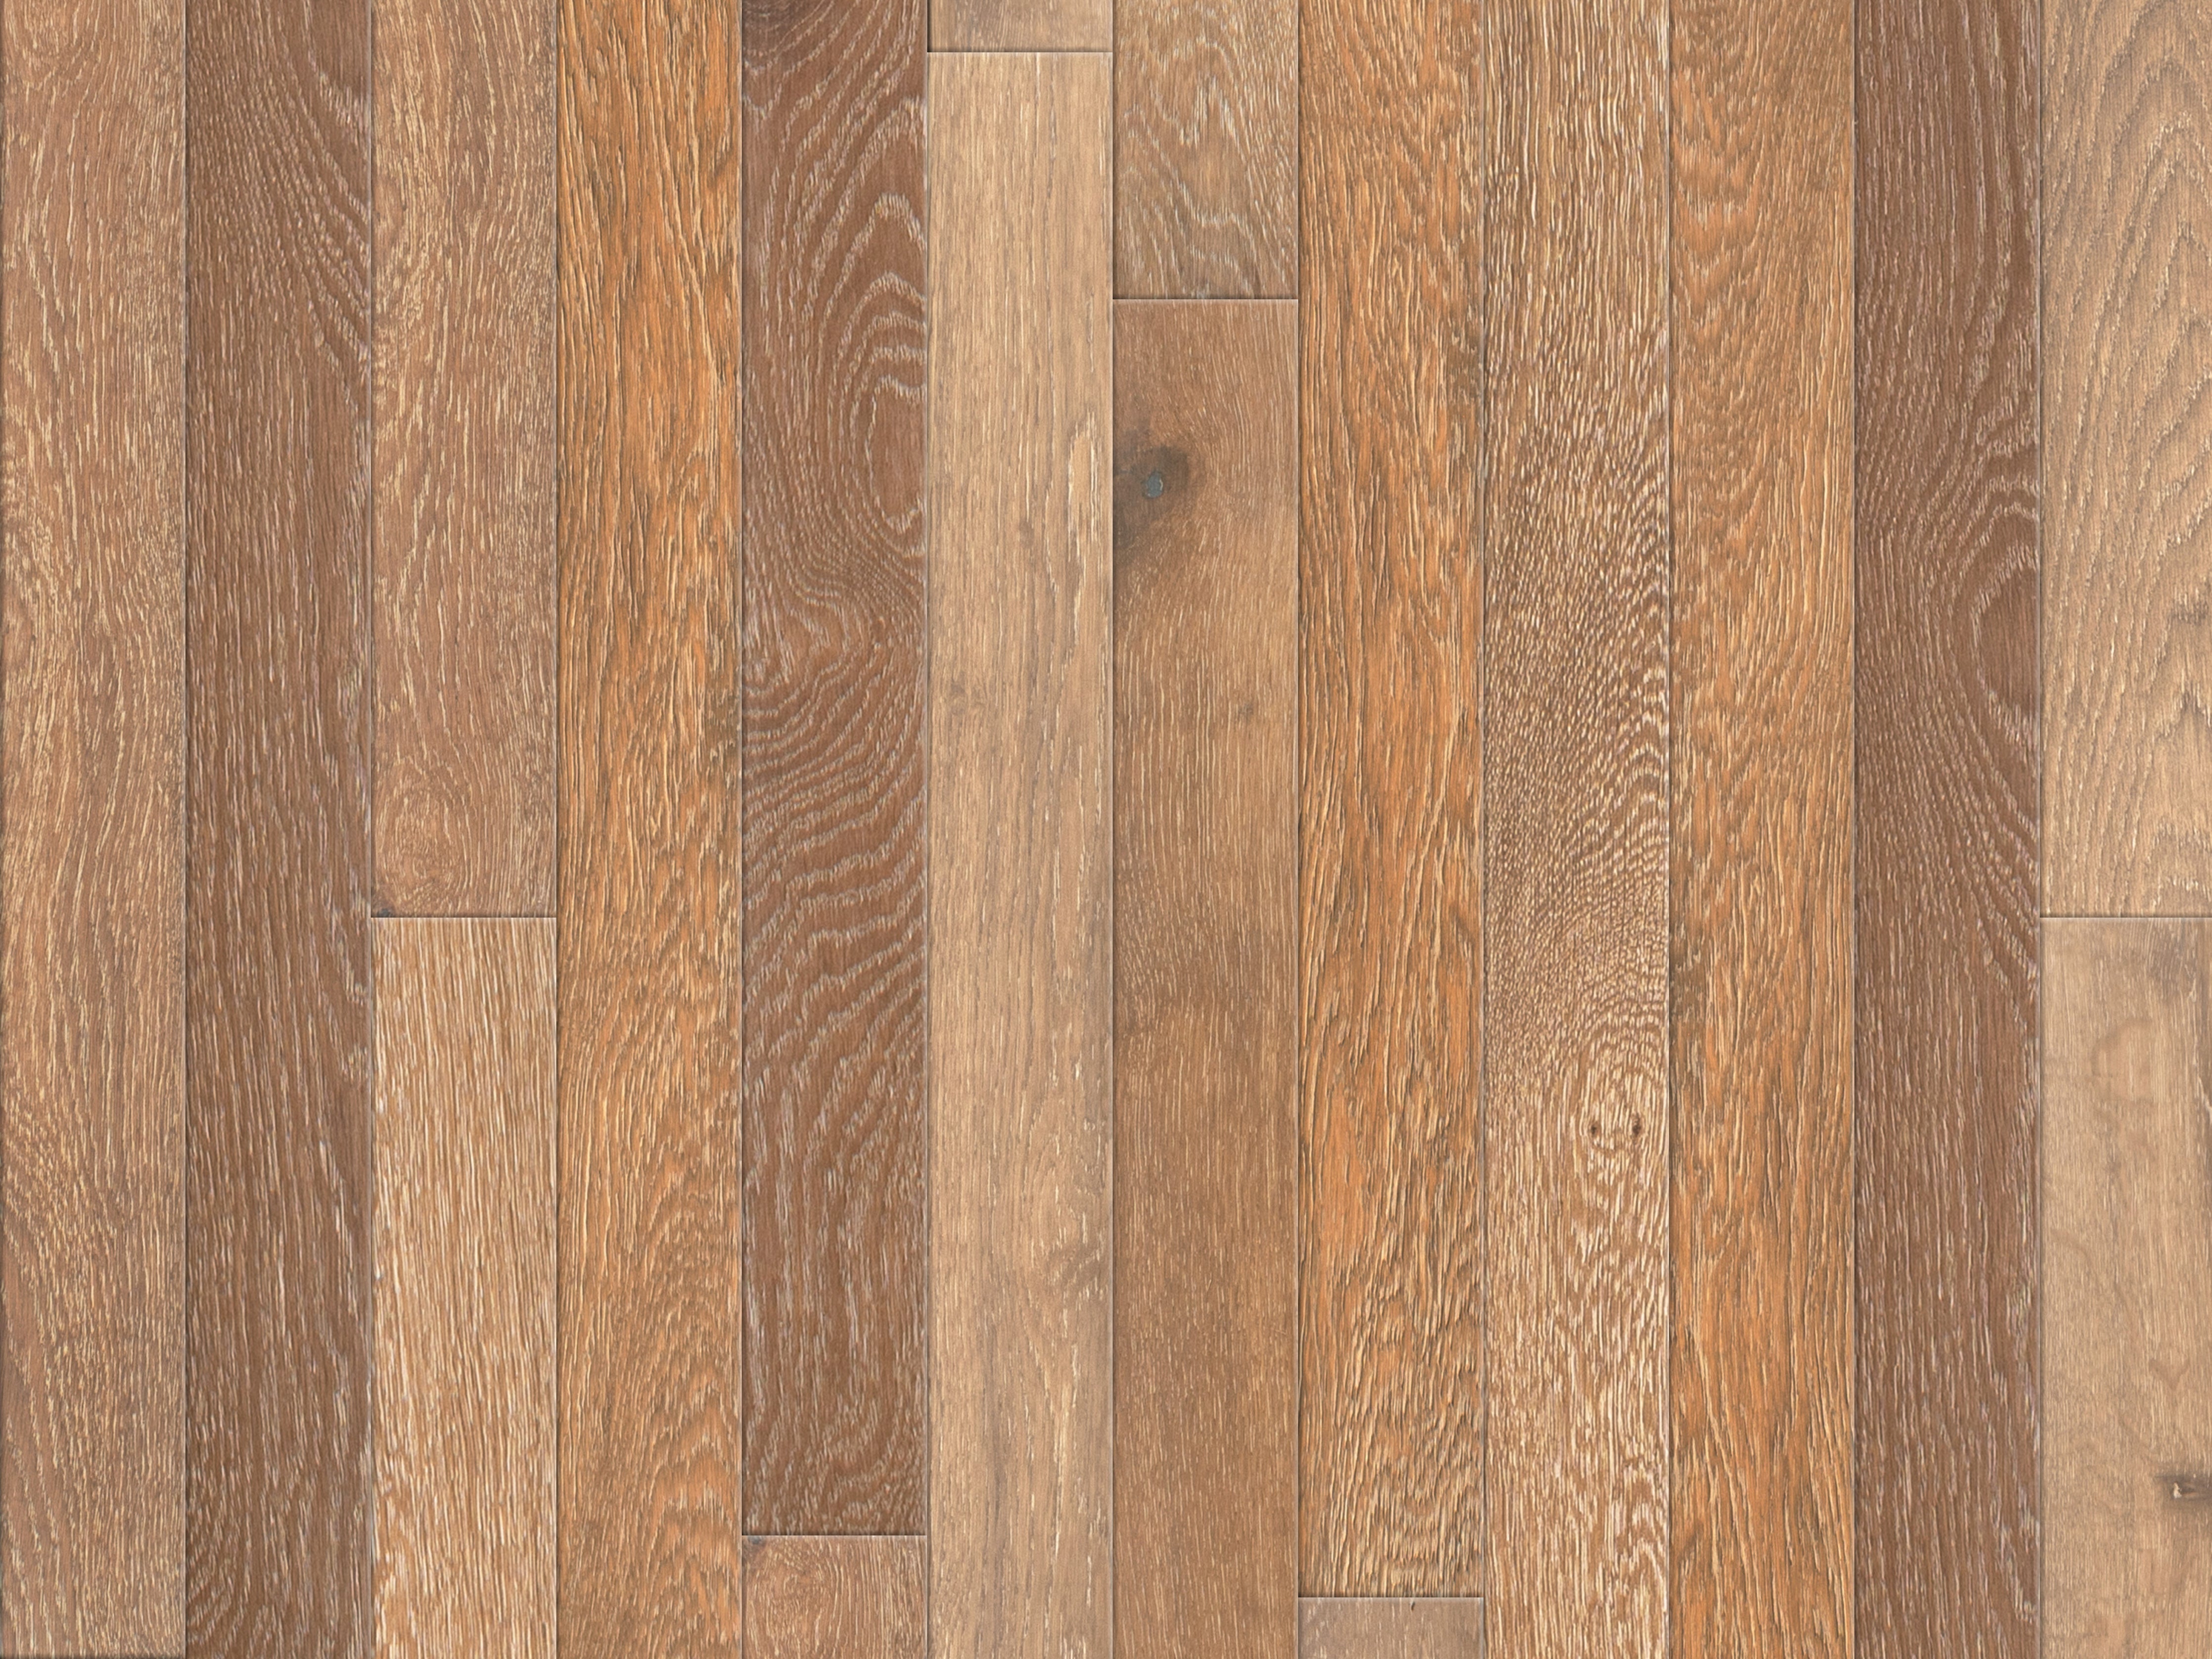 duchateau the guild makerlab edition chisel european oak engineered hardnatural wood floor uv lacquer finish for interior use distributed by surface group international